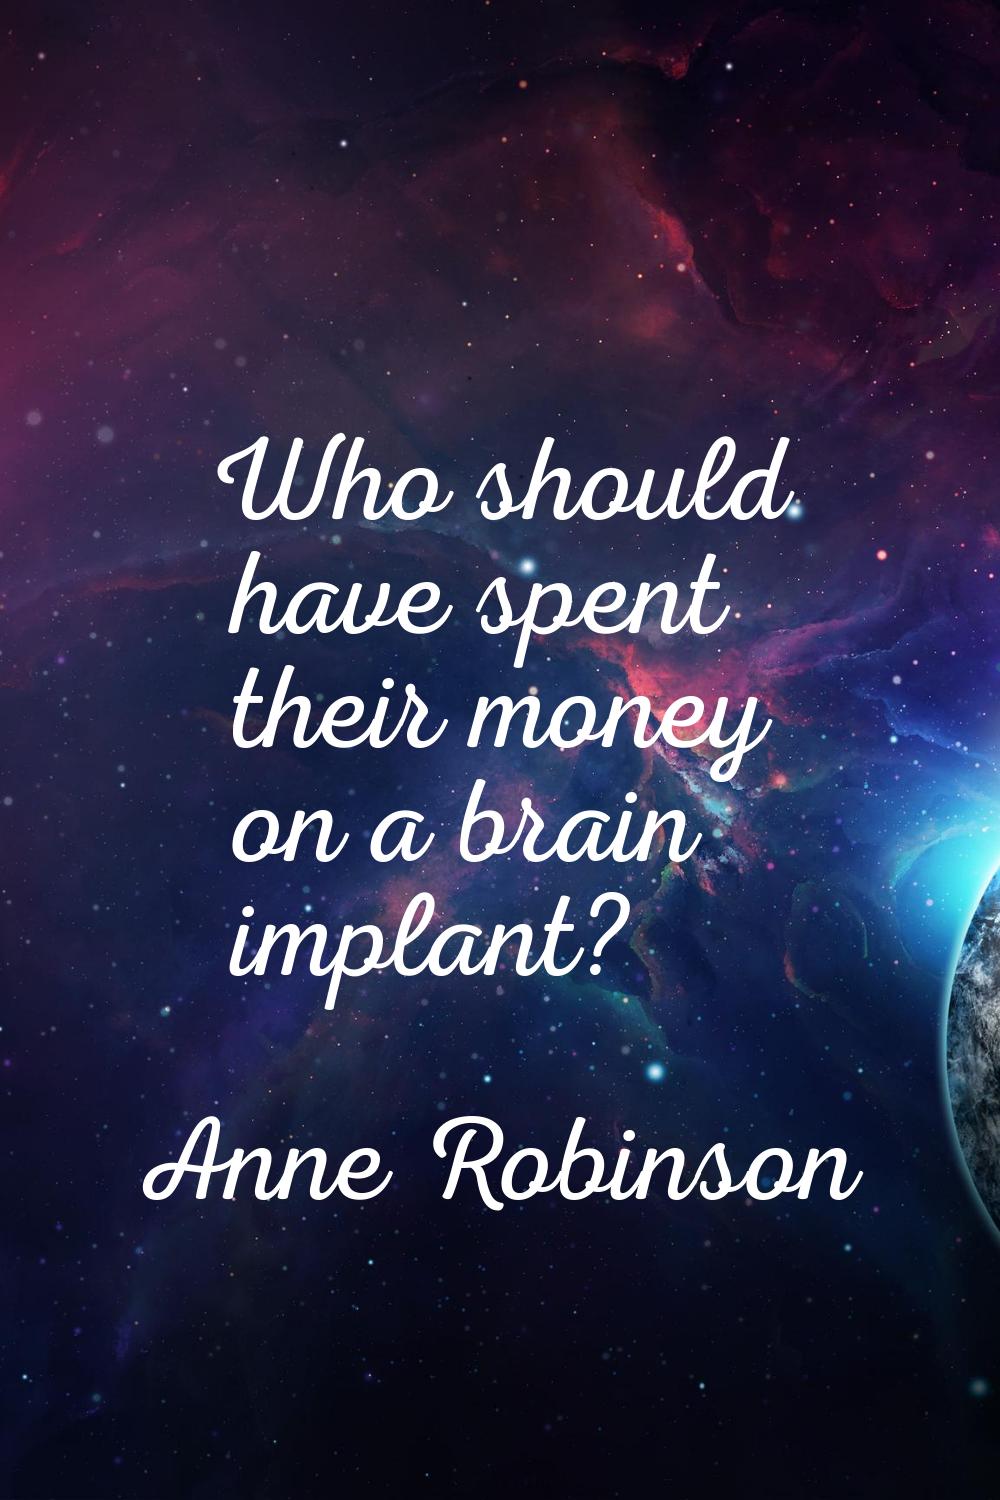 Who should have spent their money on a brain implant?